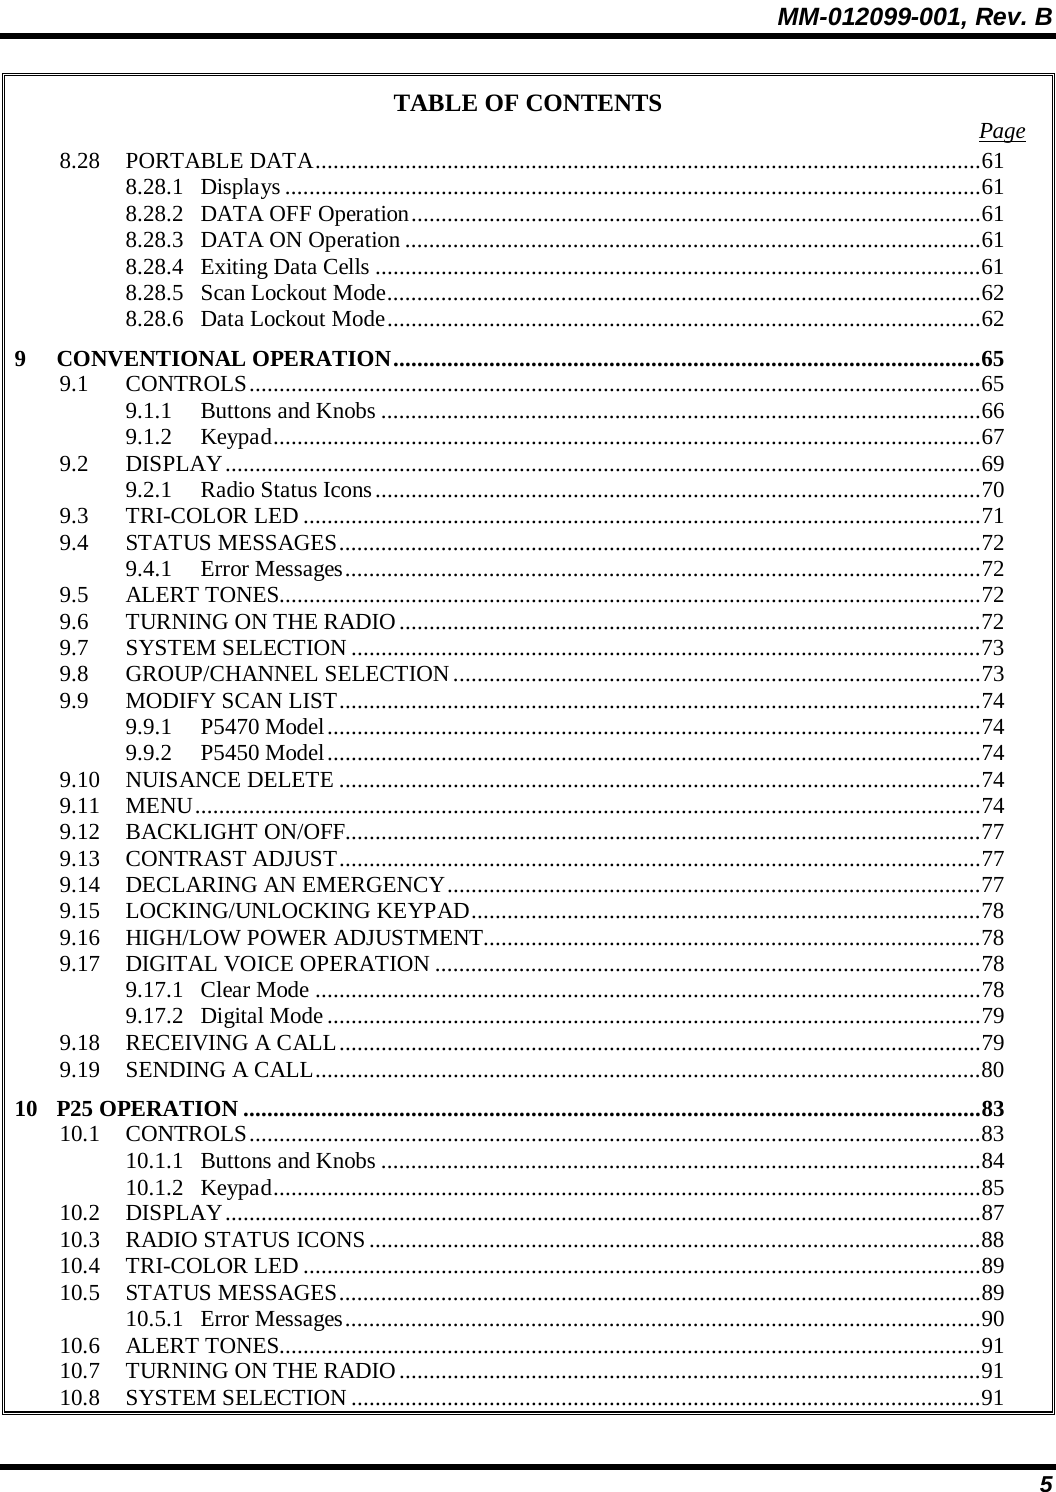 MM-012099-001, Rev. B 5 TABLE OF CONTENTS  Page 8.28 PORTABLE DATA...............................................................................................................61 8.28.1 Displays ....................................................................................................................61 8.28.2 DATA OFF Operation...............................................................................................61 8.28.3 DATA ON Operation ................................................................................................61 8.28.4 Exiting Data Cells .....................................................................................................61 8.28.5 Scan Lockout Mode...................................................................................................62 8.28.6 Data Lockout Mode...................................................................................................62 9 CONVENTIONAL OPERATION..................................................................................................65 9.1 CONTROLS..........................................................................................................................65 9.1.1 Buttons and Knobs ....................................................................................................66 9.1.2 Keypad......................................................................................................................67 9.2 DISPLAY..............................................................................................................................69 9.2.1 Radio Status Icons.....................................................................................................70 9.3 TRI-COLOR LED .................................................................................................................71 9.4 STATUS MESSAGES...........................................................................................................72 9.4.1 Error Messages..........................................................................................................72 9.5 ALERT TONES.....................................................................................................................72 9.6 TURNING ON THE RADIO.................................................................................................72 9.7 SYSTEM SELECTION.........................................................................................................73 9.8 GROUP/CHANNEL SELECTION ........................................................................................73 9.9 MODIFY SCAN LIST...........................................................................................................74 9.9.1 P5470 Model.............................................................................................................74 9.9.2 P5450 Model.............................................................................................................74 9.10 NUISANCE DELETE ...........................................................................................................74 9.11 MENU...................................................................................................................................74 9.12 BACKLIGHT ON/OFF..........................................................................................................77 9.13 CONTRAST ADJUST...........................................................................................................77 9.14 DECLARING AN EMERGENCY.........................................................................................77 9.15 LOCKING/UNLOCKING KEYPAD.....................................................................................78 9.16 HIGH/LOW POWER ADJUSTMENT...................................................................................78 9.17 DIGITAL VOICE OPERATION ...........................................................................................78 9.17.1 Clear Mode ...............................................................................................................78 9.17.2 Digital Mode.............................................................................................................79 9.18 RECEIVING A CALL...........................................................................................................79 9.19 SENDING A CALL...............................................................................................................80 10 P25 OPERATION ...........................................................................................................................83 10.1 CONTROLS..........................................................................................................................83 10.1.1 Buttons and Knobs ....................................................................................................84 10.1.2 Keypad......................................................................................................................85 10.2 DISPLAY..............................................................................................................................87 10.3 RADIO STATUS ICONS......................................................................................................88 10.4 TRI-COLOR LED .................................................................................................................89 10.5 STATUS MESSAGES...........................................................................................................89 10.5.1 Error Messages..........................................................................................................90 10.6 ALERT TONES.....................................................................................................................91 10.7 TURNING ON THE RADIO.................................................................................................91 10.8 SYSTEM SELECTION.........................................................................................................91 